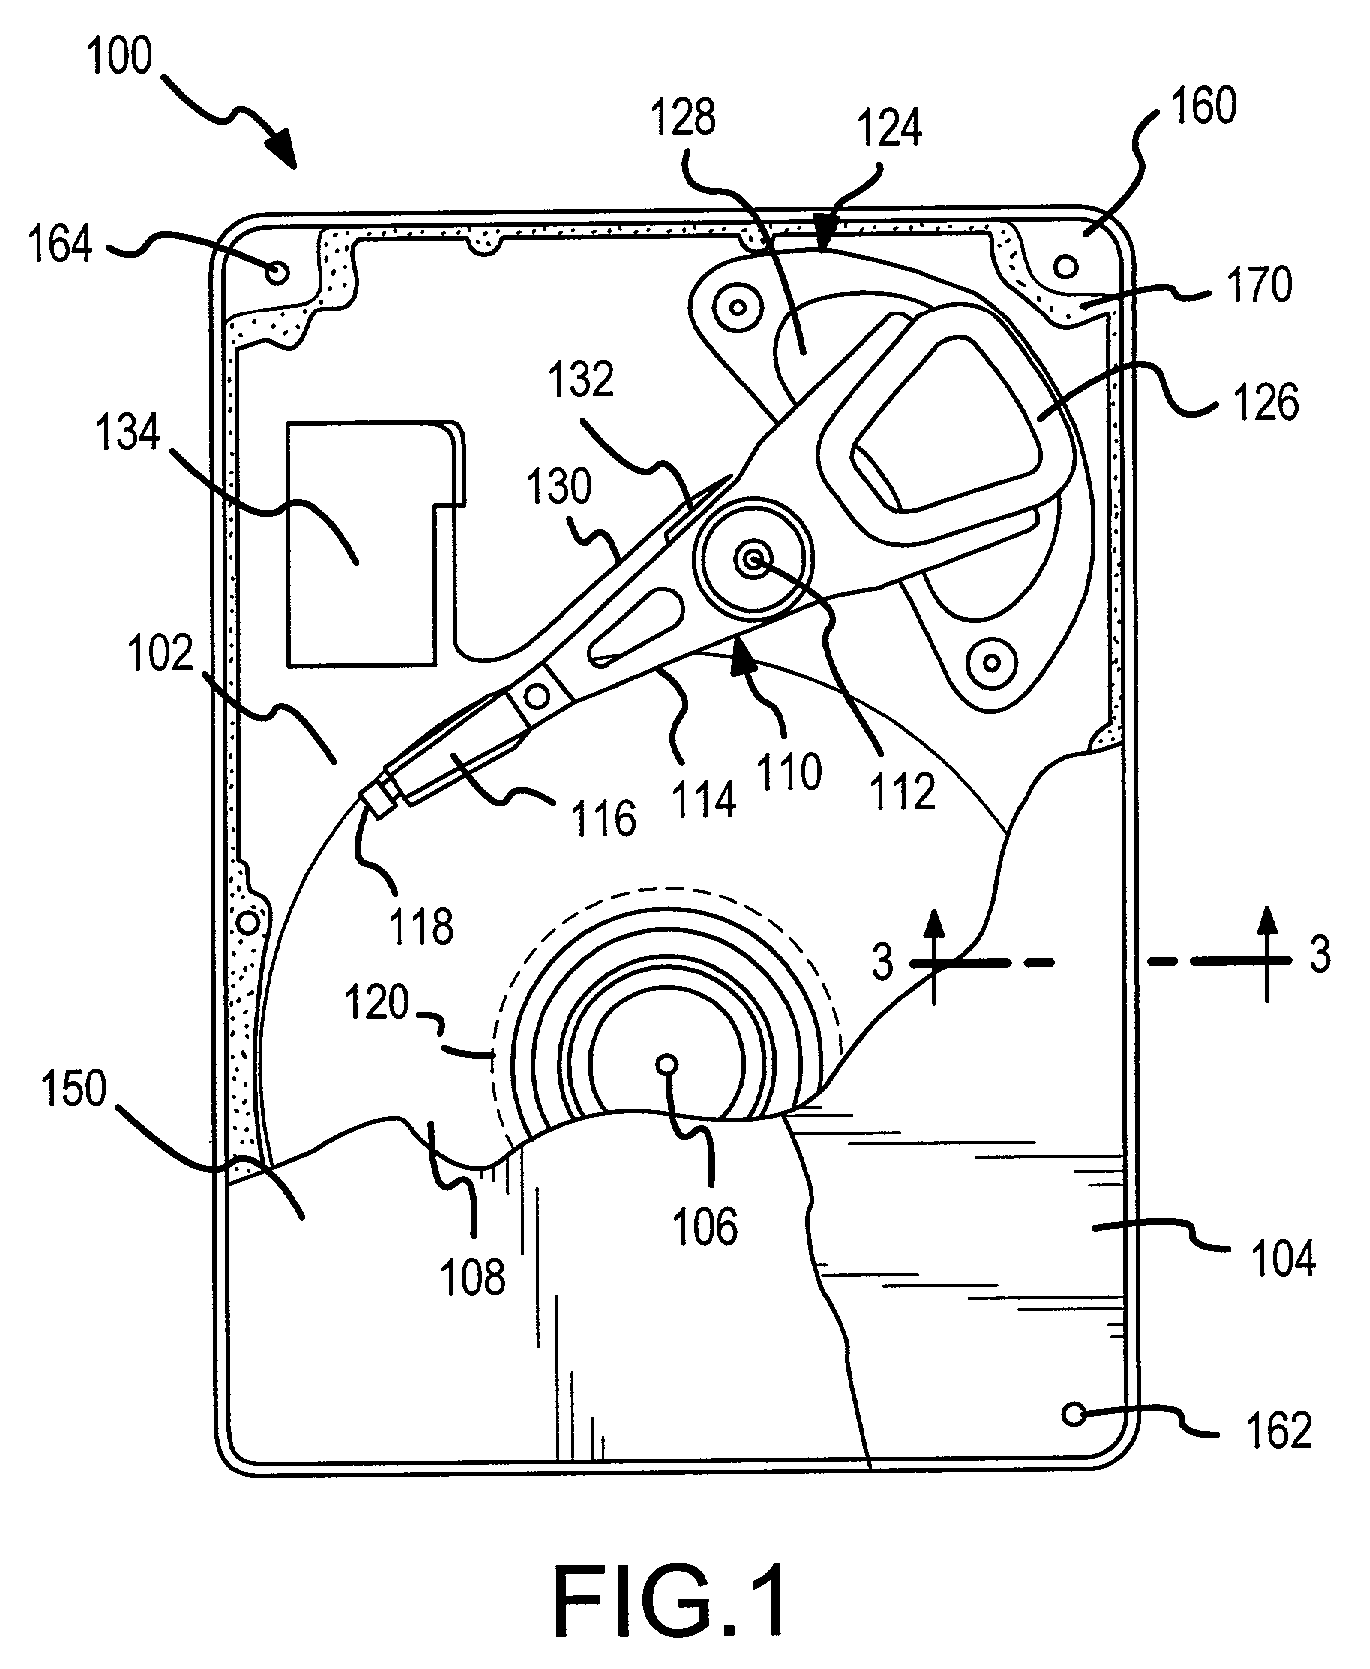 Two-stage sealing of a data storage assembly housing to retain a low density atmosphere